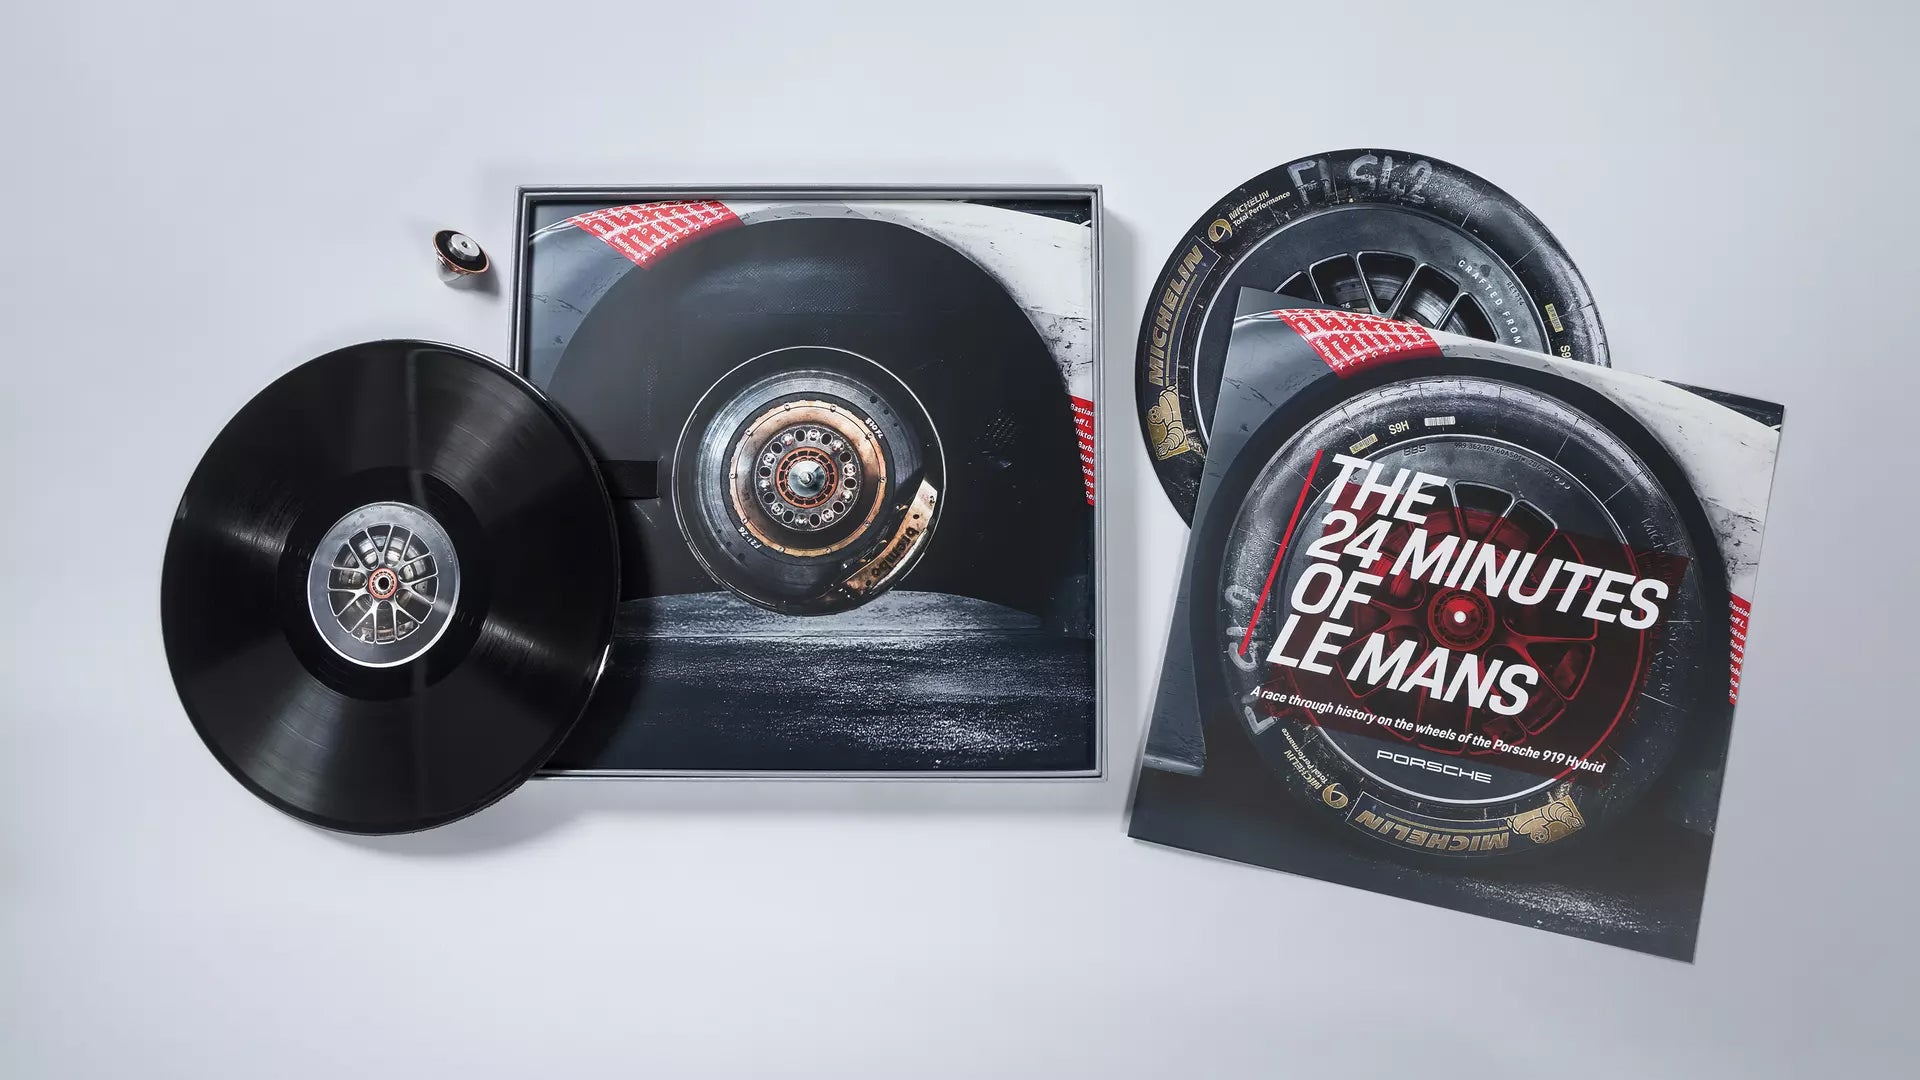 Porsche Made Vinyl Records From the Tires of Le Mans-Winning 919 Hybrid,  Because Why Not